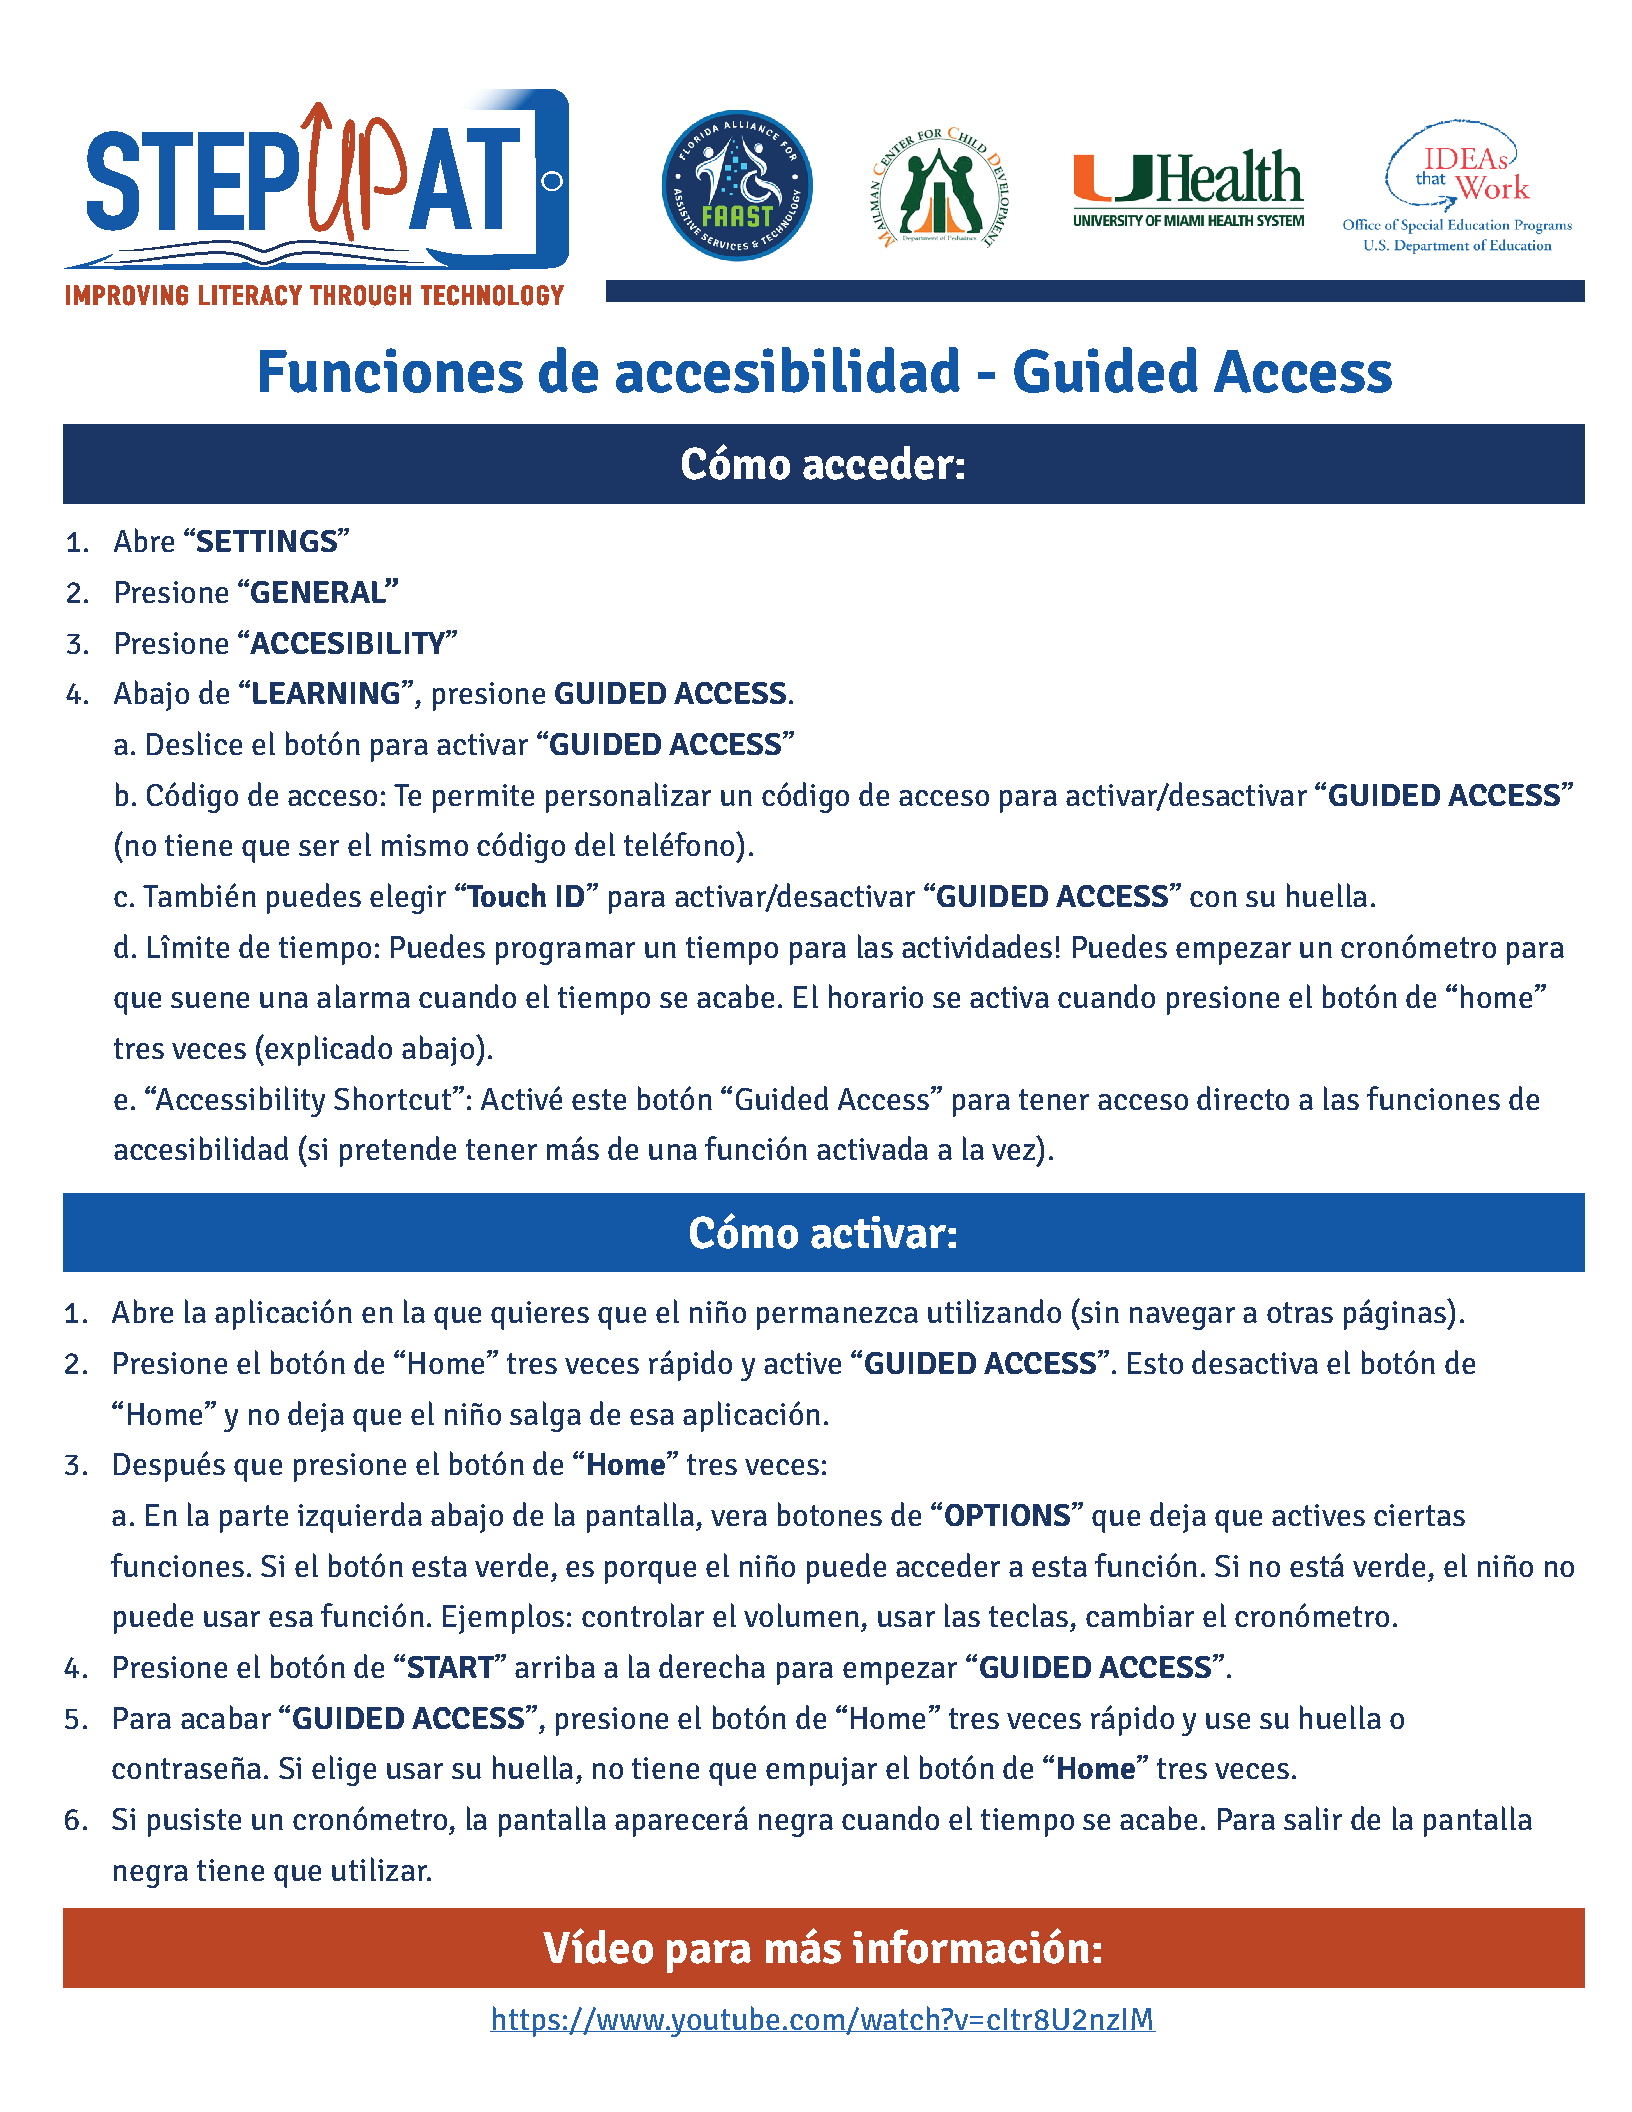 iOS Accessibility Features, how to set up Guided Access in Spanish